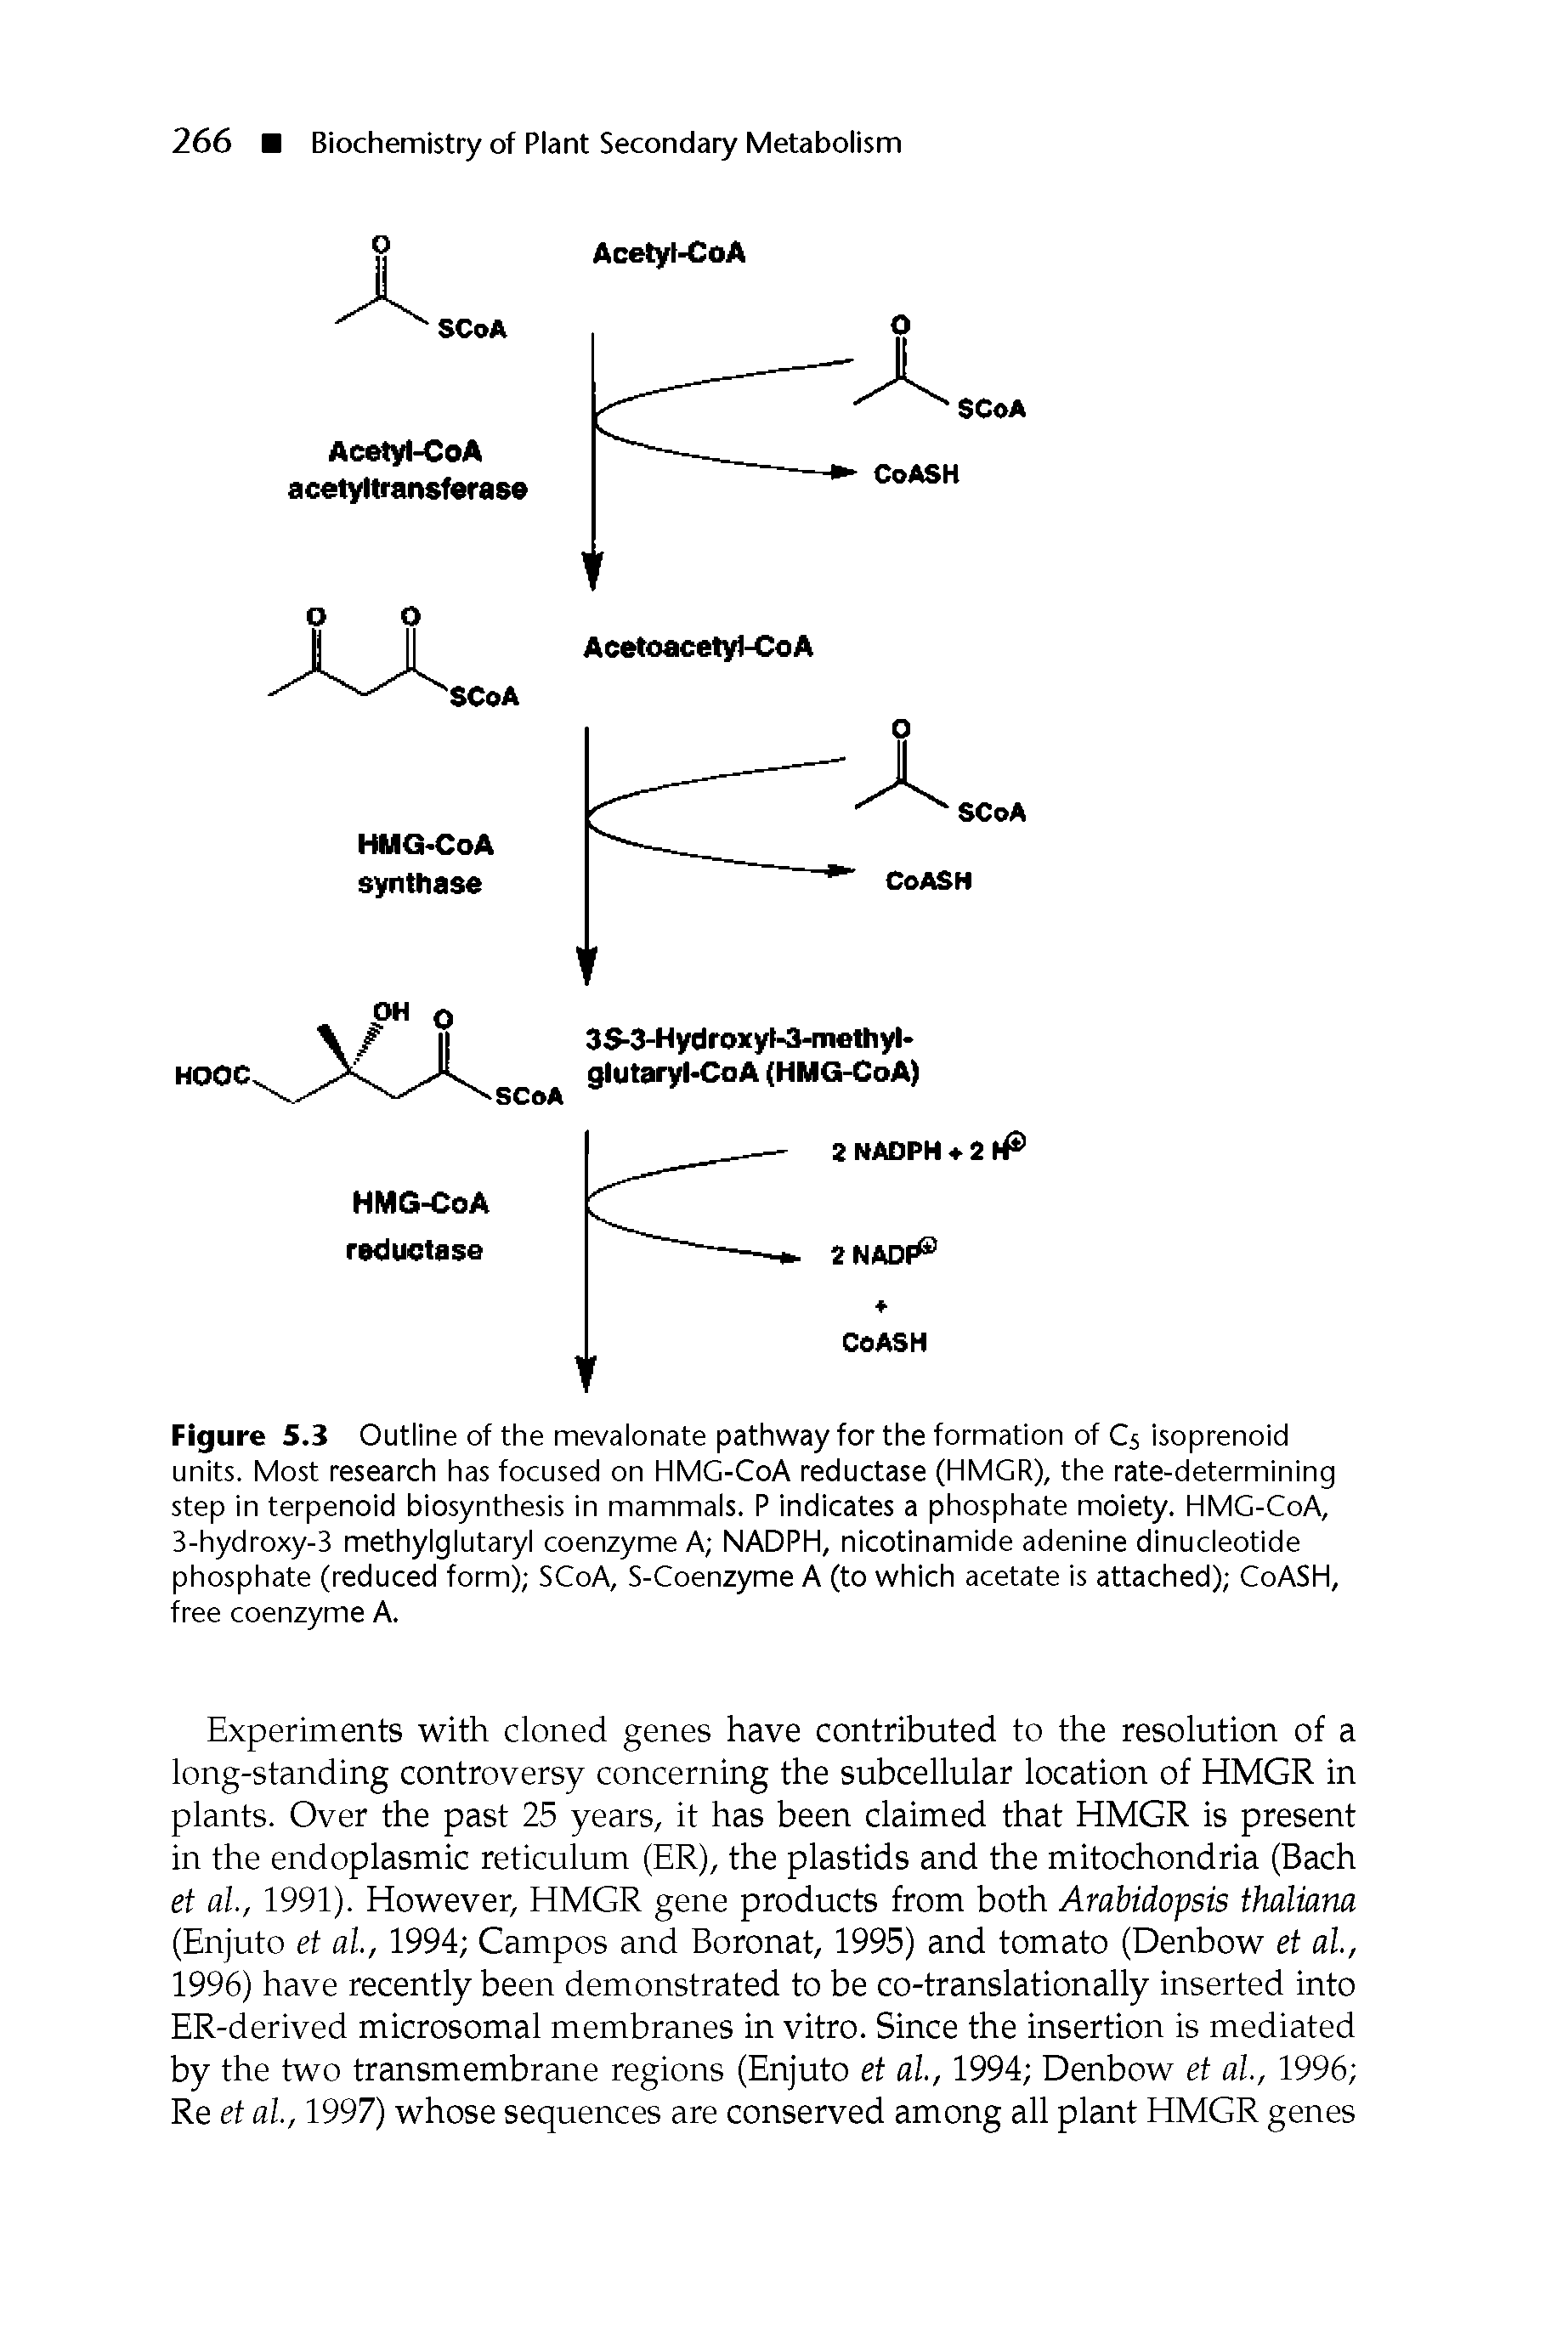 Figure 5.3 Outline of the mevalonate pathway for the formation of C5 isoprenoid units. Most research has focused on HMC-CoA reductase (HMCR), the rate-determining step in terpenoid biosynthesis in mammals. P indicates a phosphate moiety. HMC-CoA, 3-hydroxy-3 methylglutaryl coenzyme A NADPH, nicotinamide adenine dinucleotide phosphate (reduced form) SCoA, S-Coenzyme A (to which acetate is attached) CoASH, free coenzyme A.